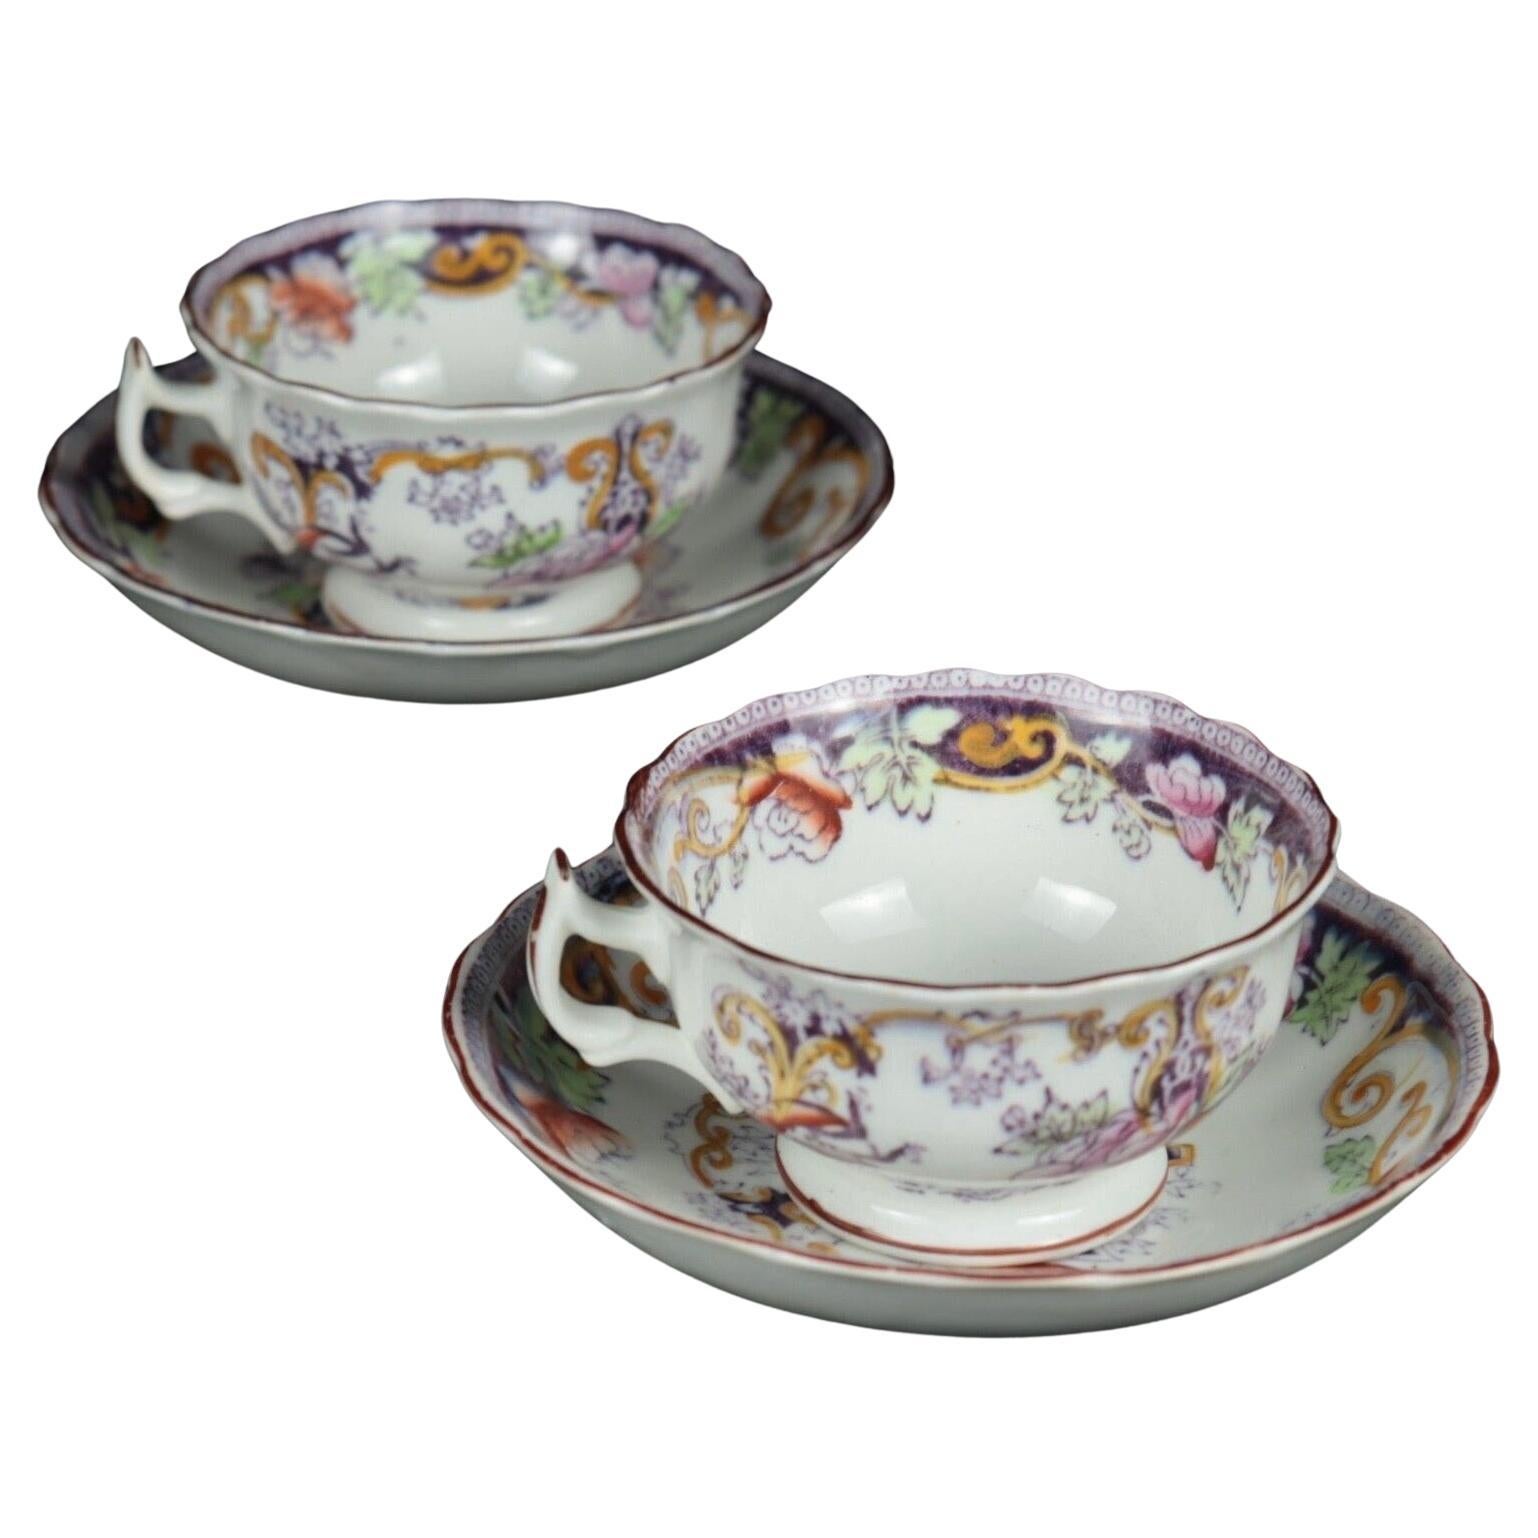 Victorian Pair of Antique 1890 English Bone China Tea Cup and Saucer Sets For Sale